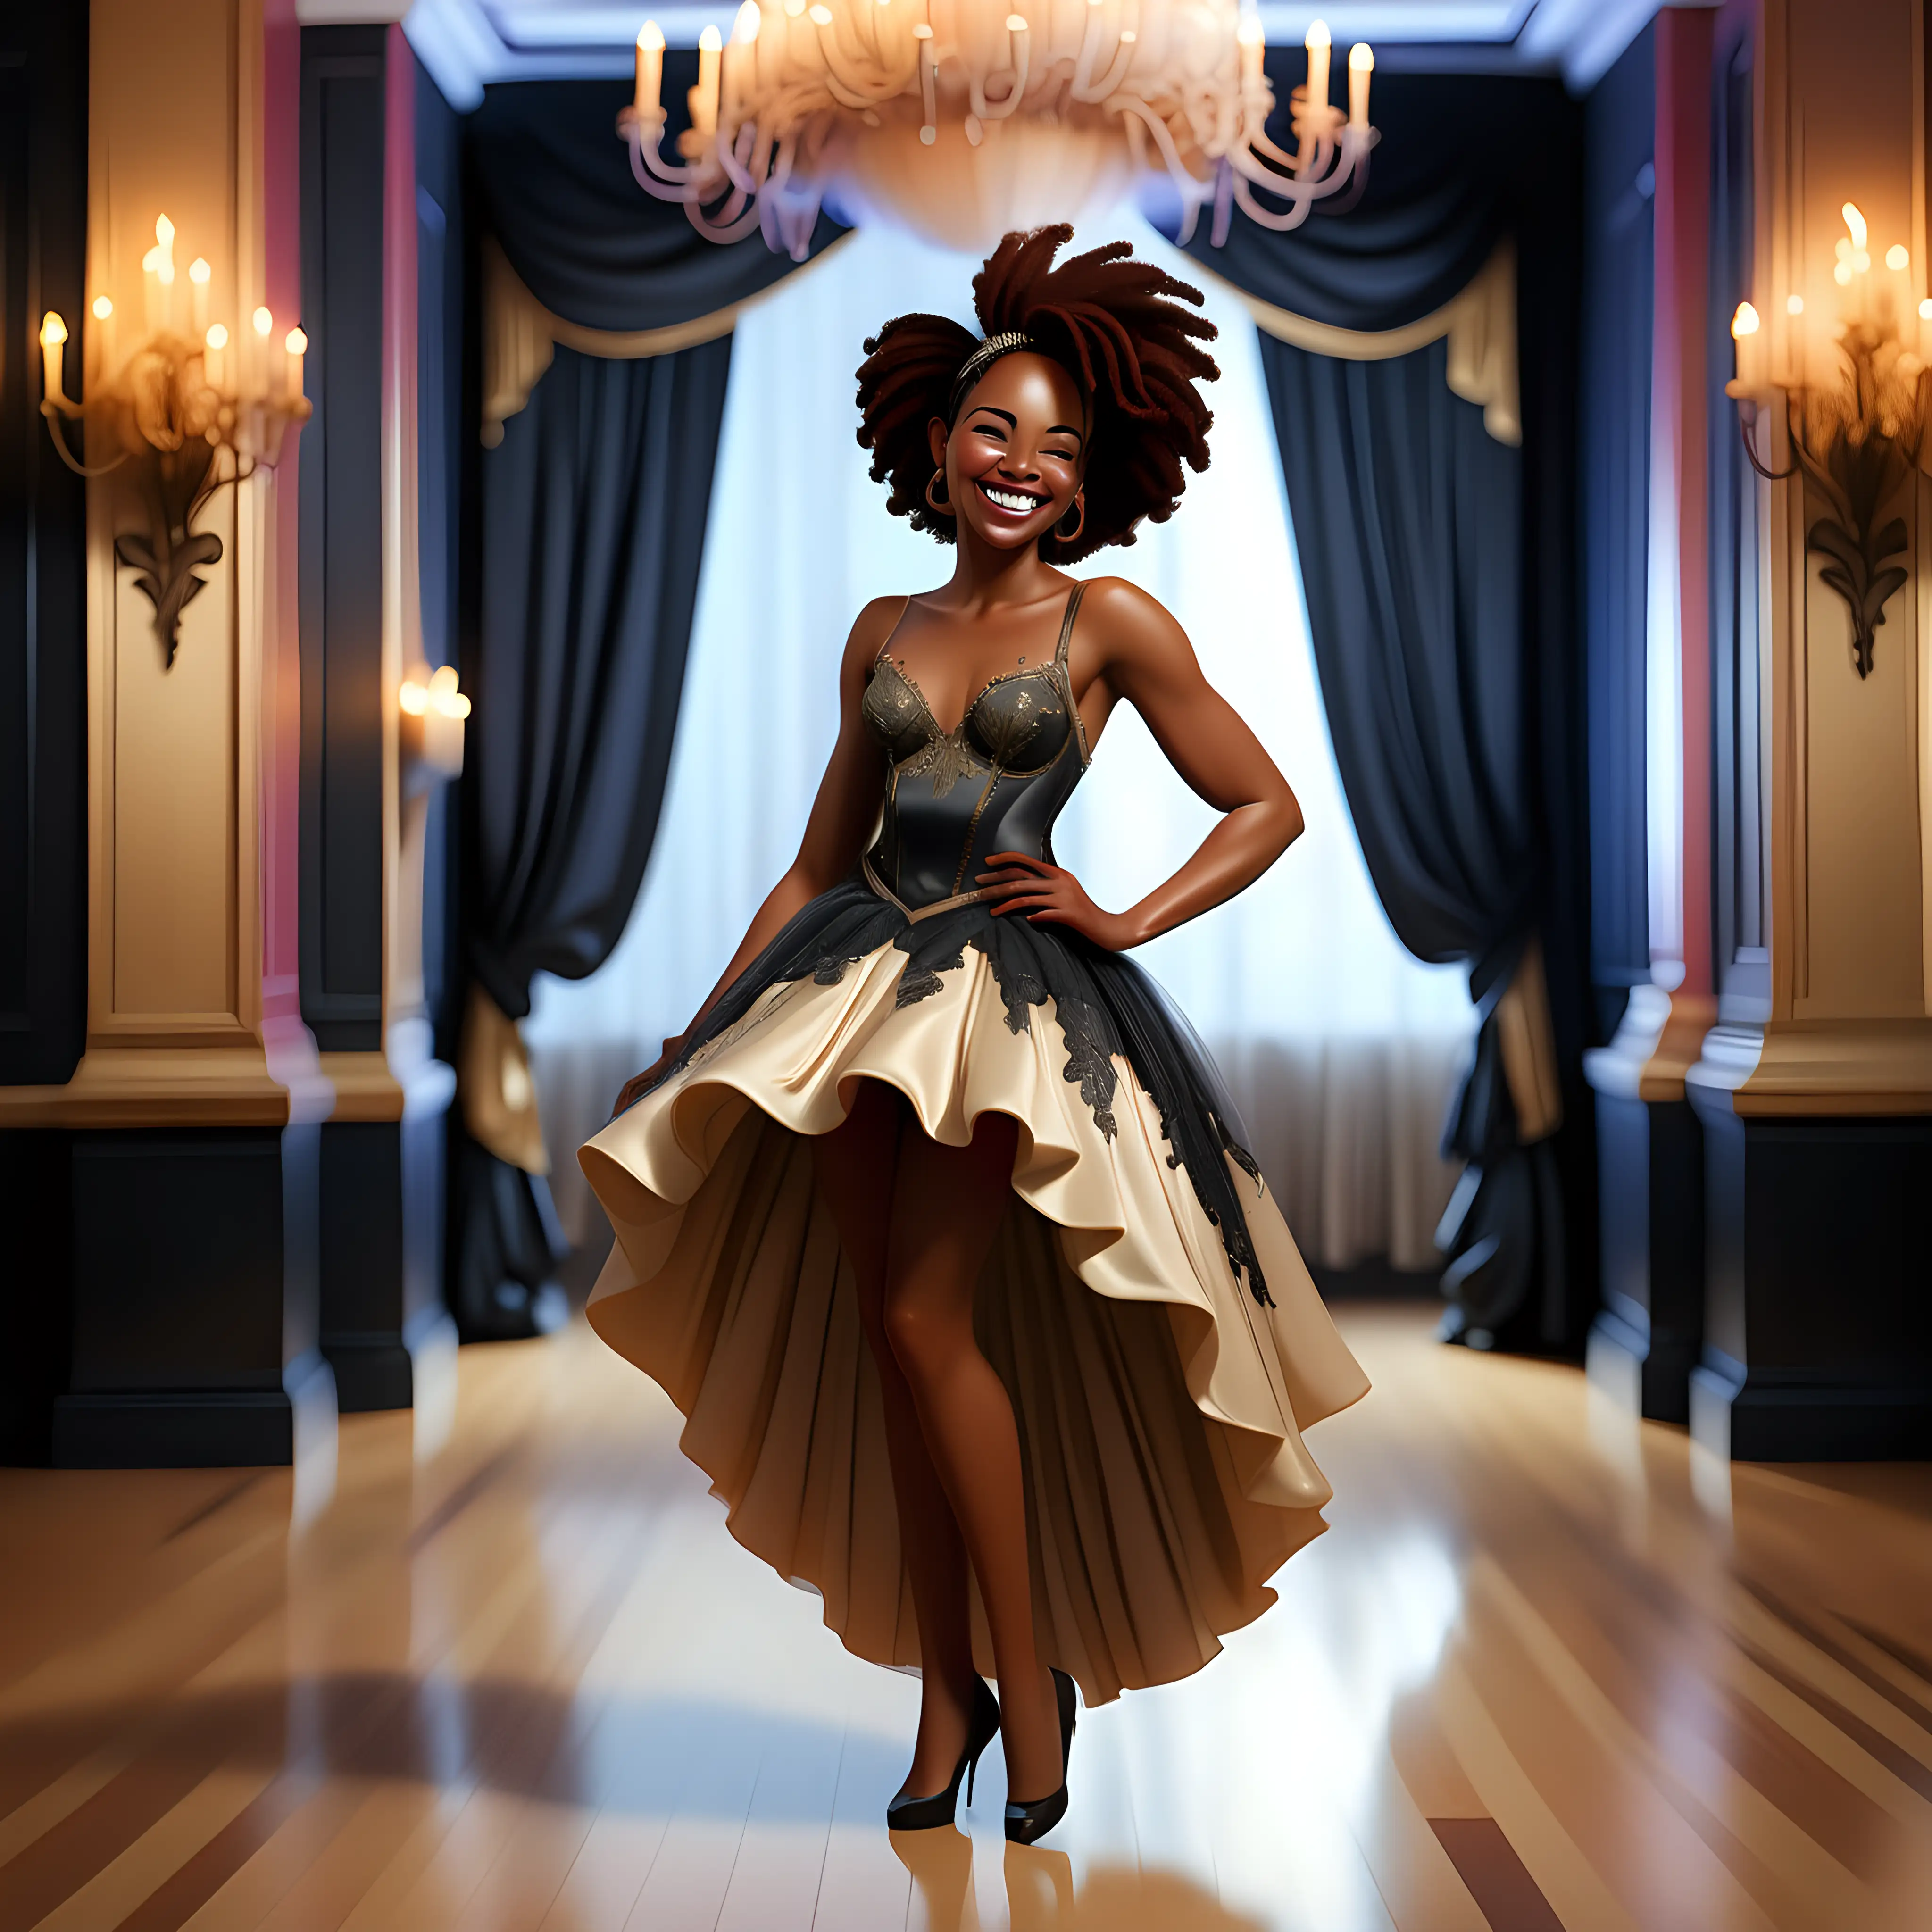 Vibrant HyperRealistic Image African American Woman Emerging from Pineapple  Dress